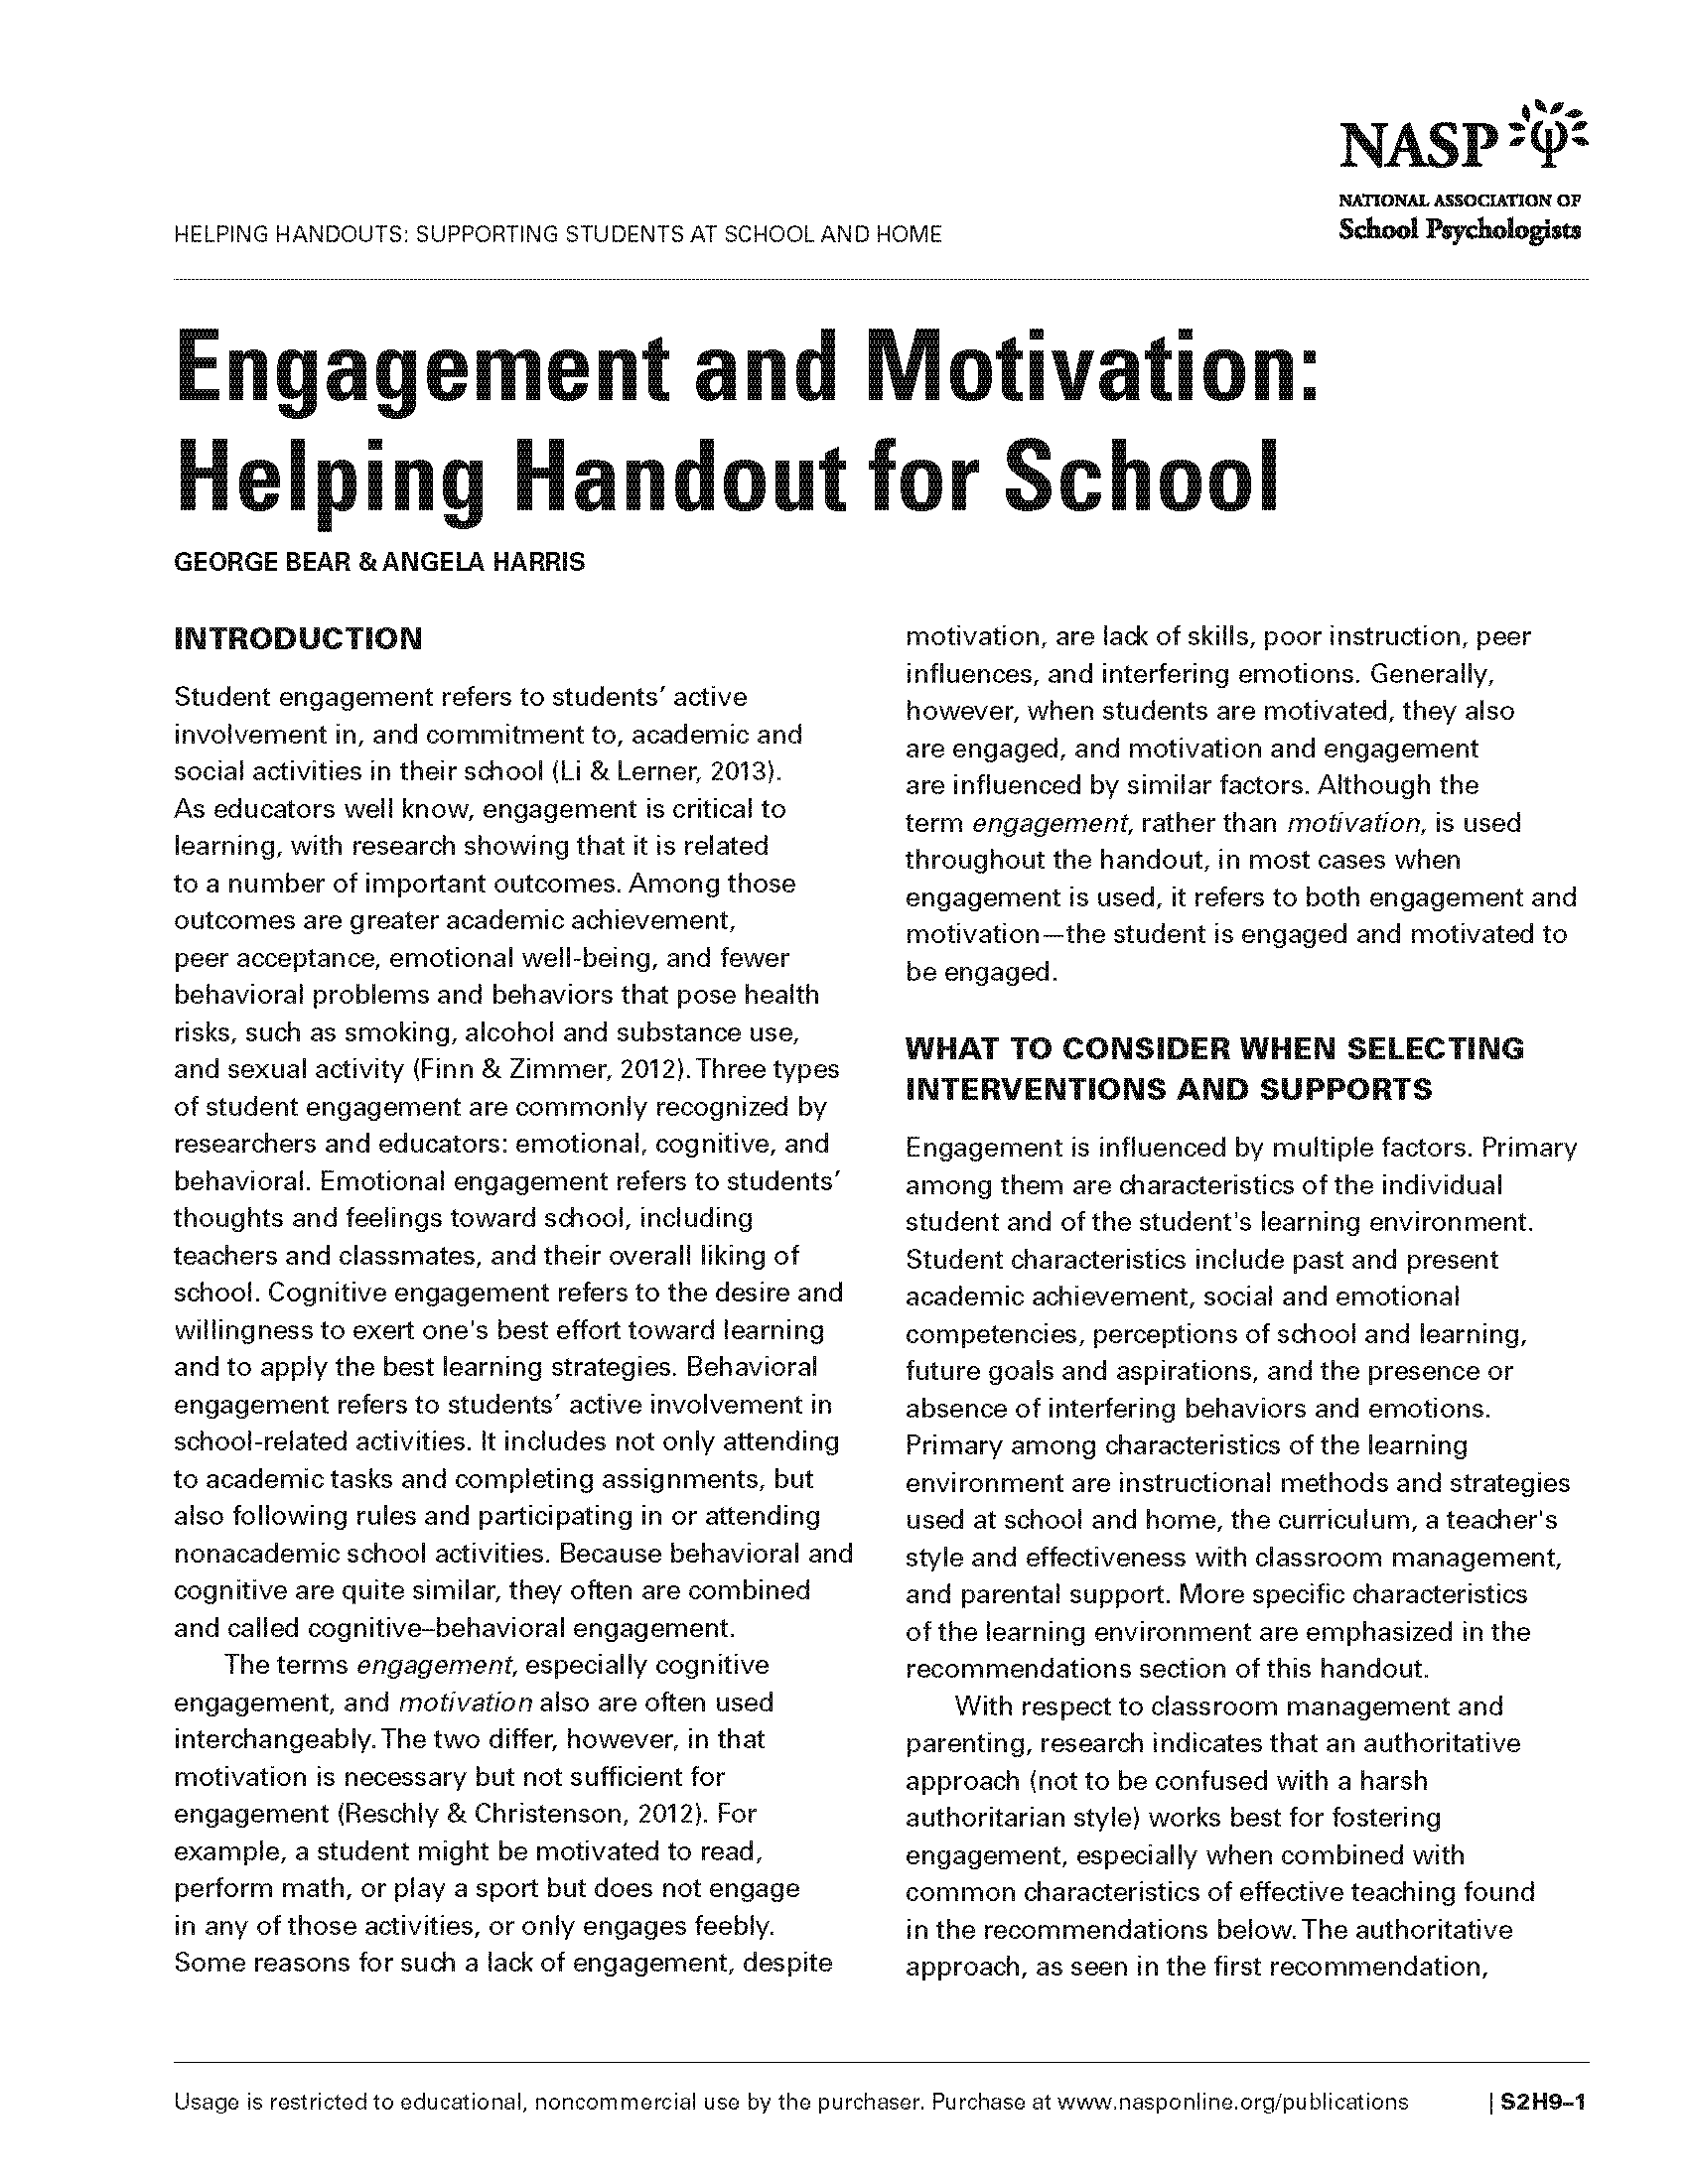 Engagement and Motivation: Helping Handout for School